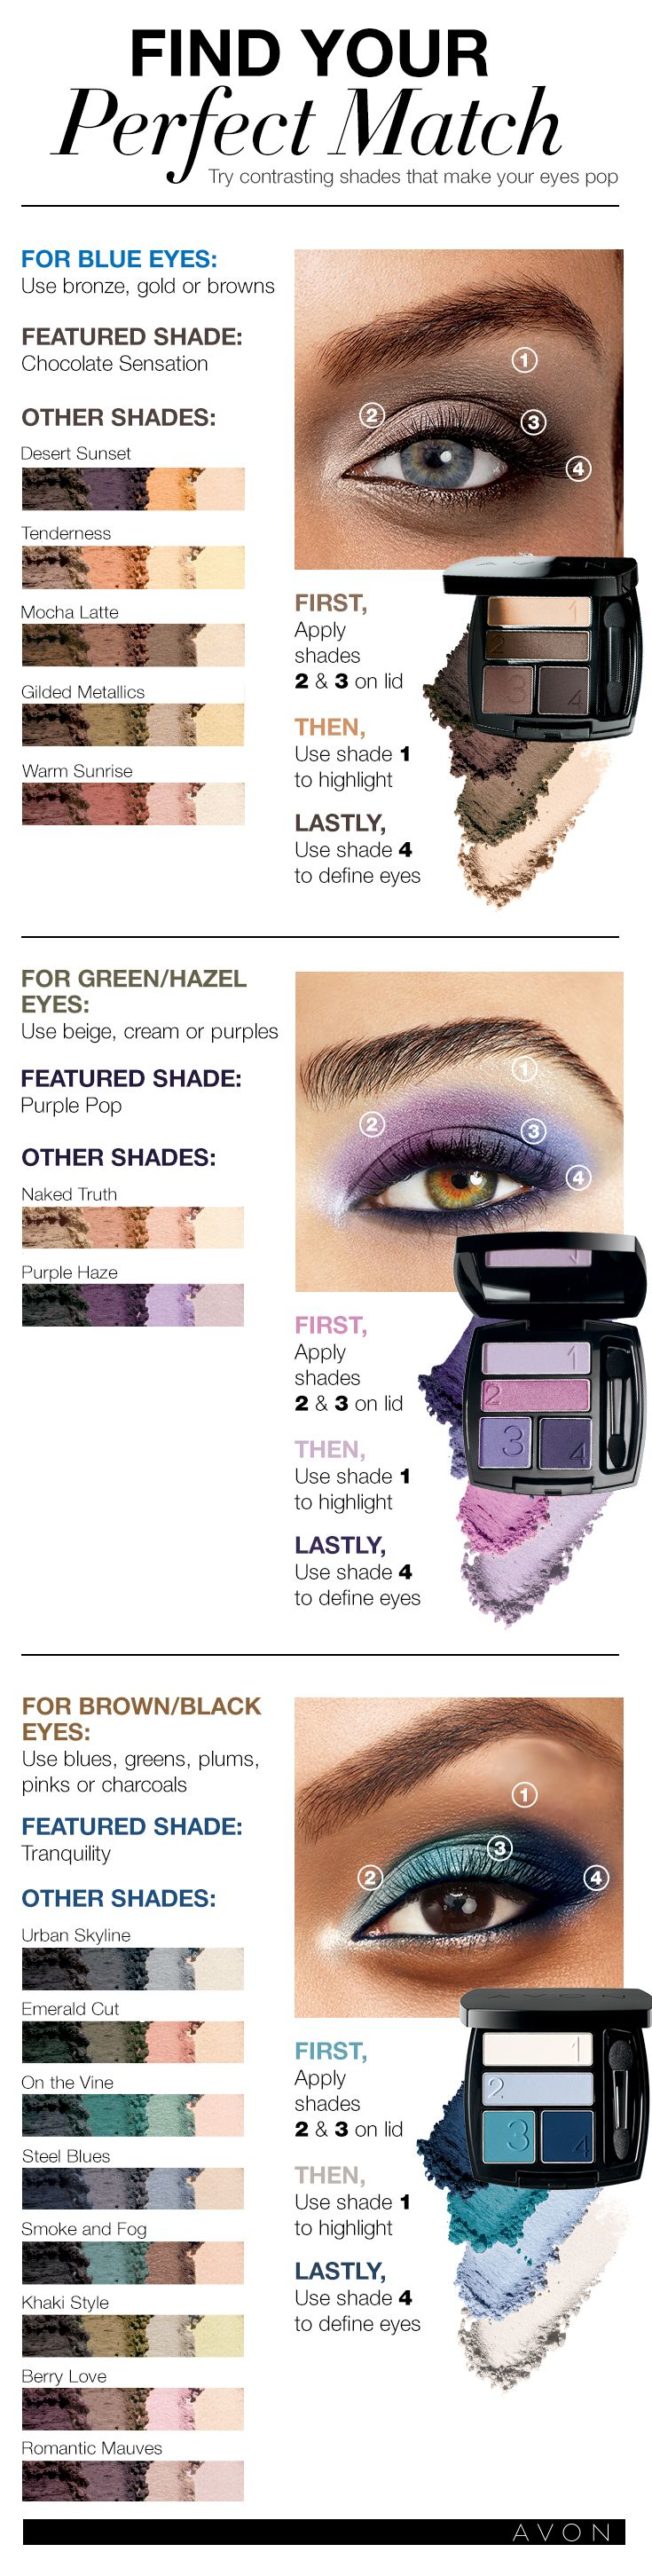 Find the perfect shade to make your eyes pop #AvonCanada